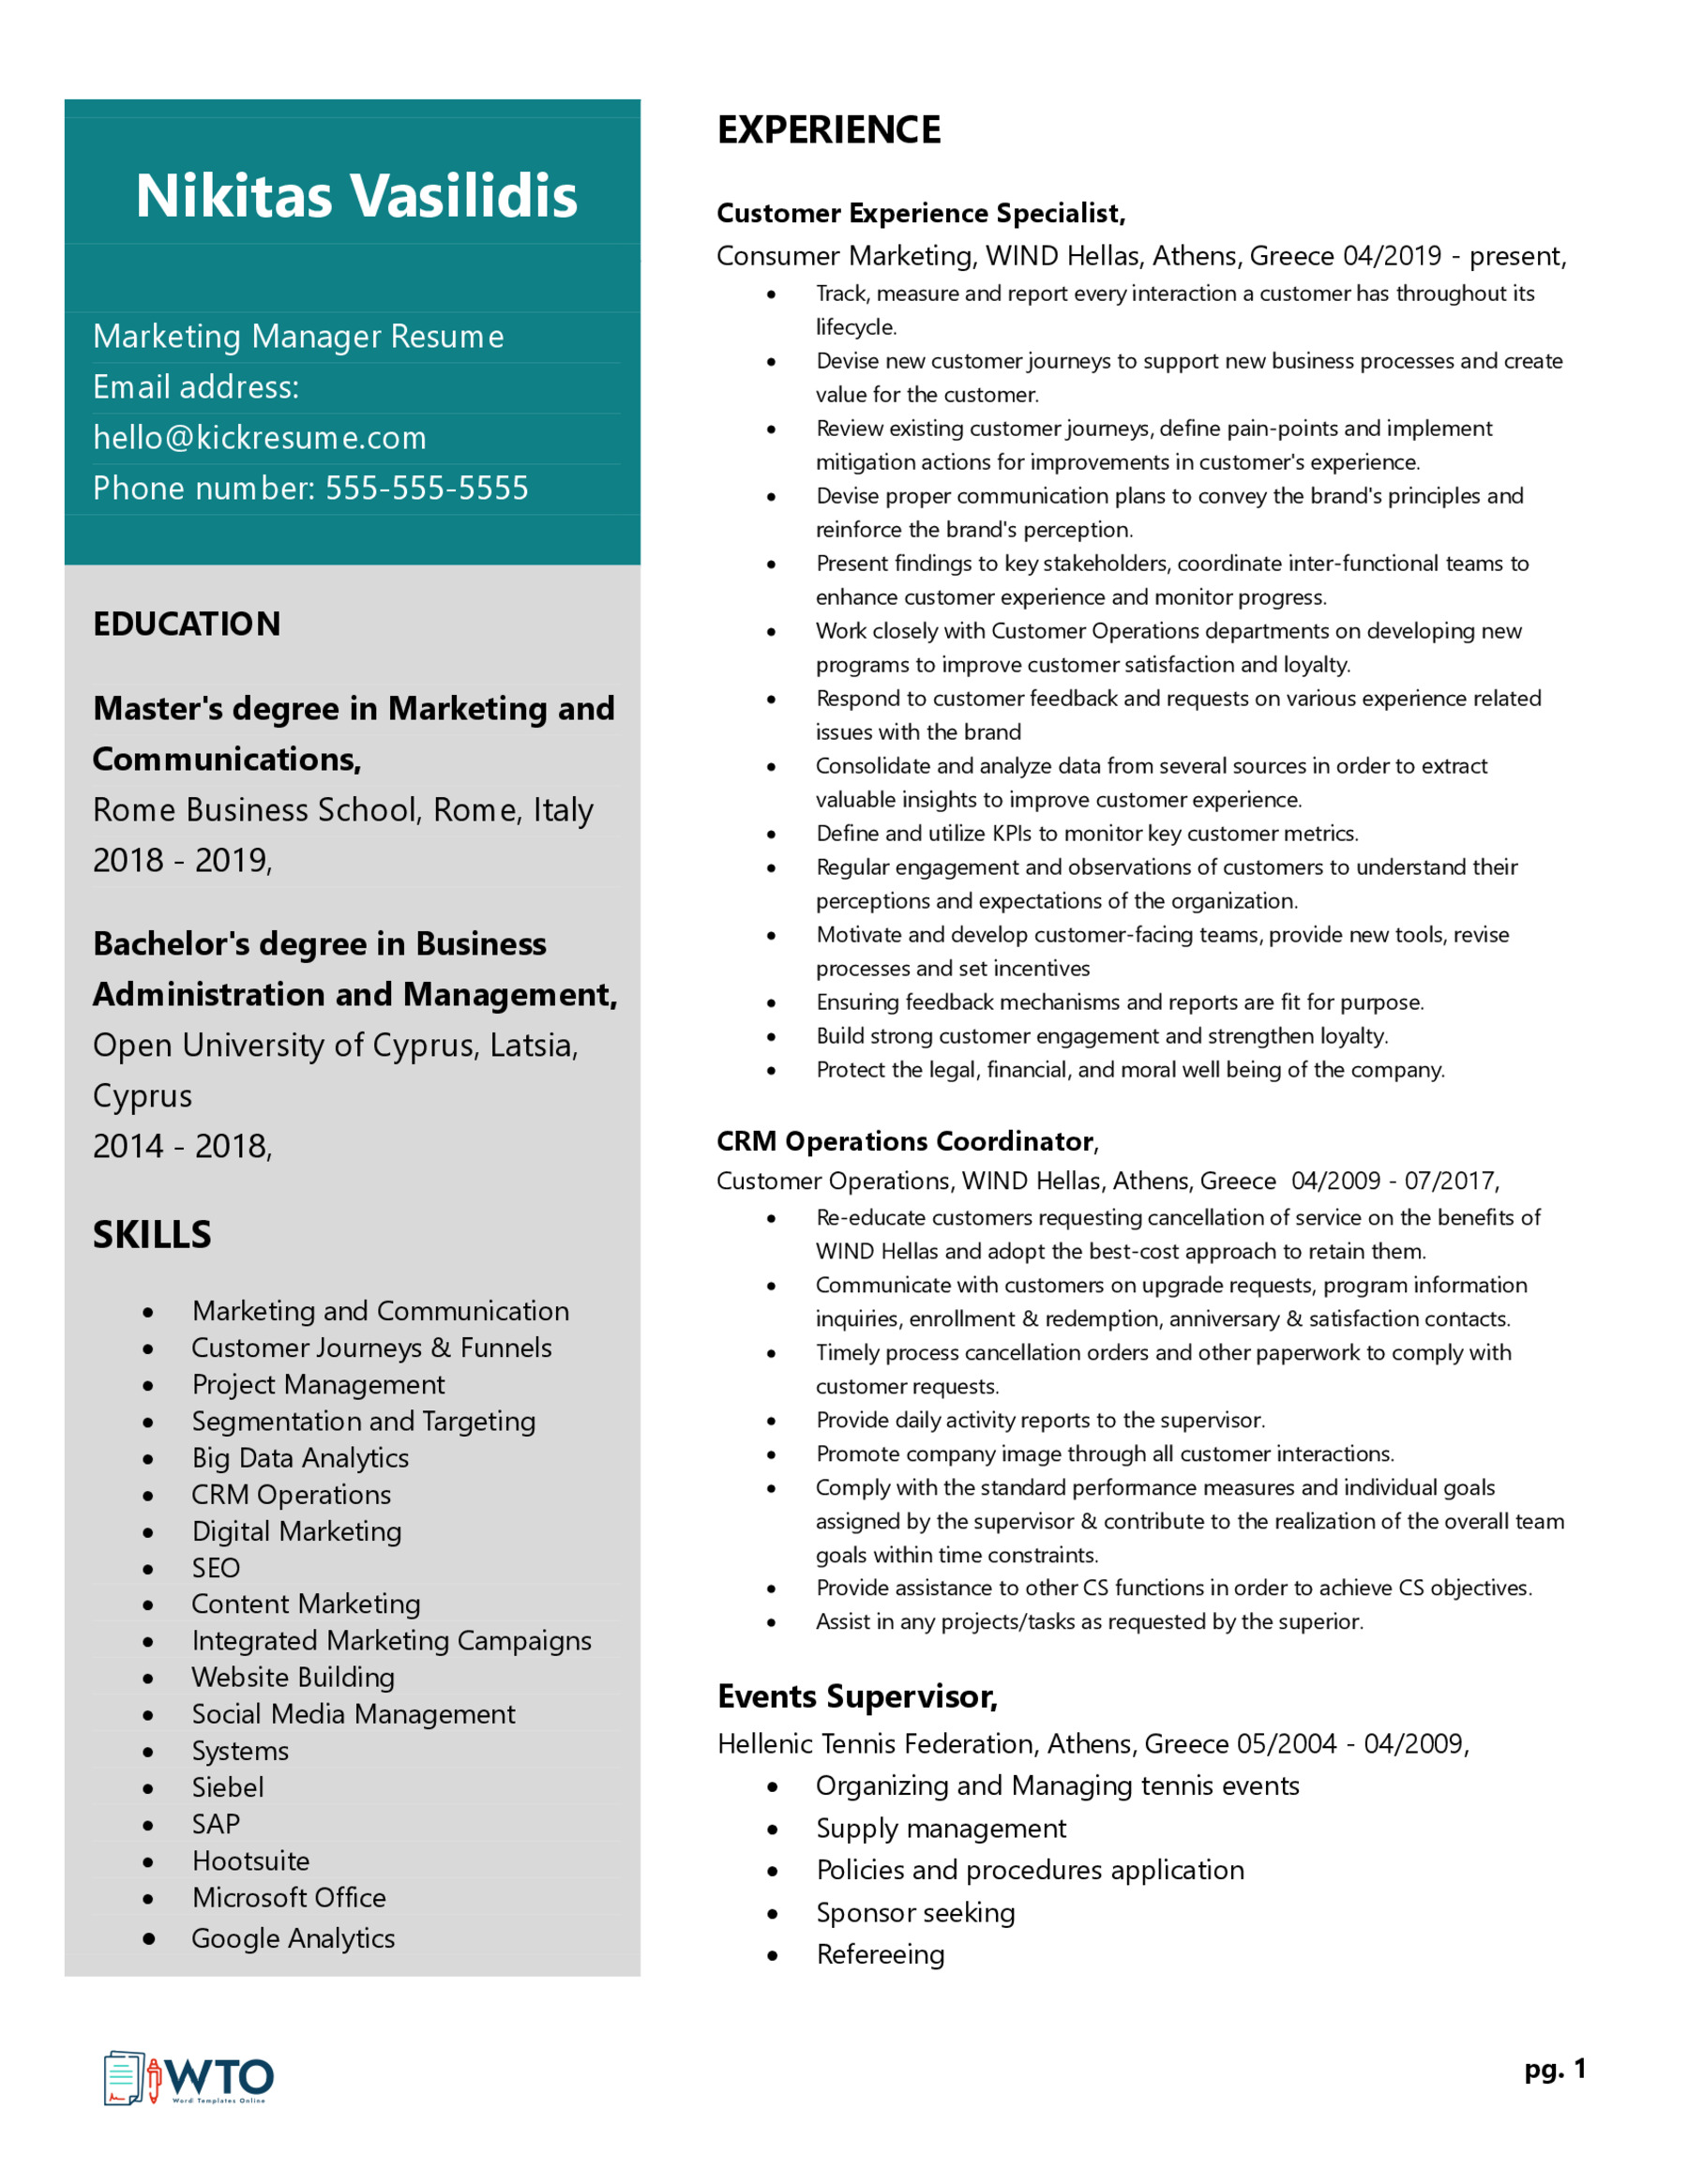 Marketing Manager Resume Example - Effective Format